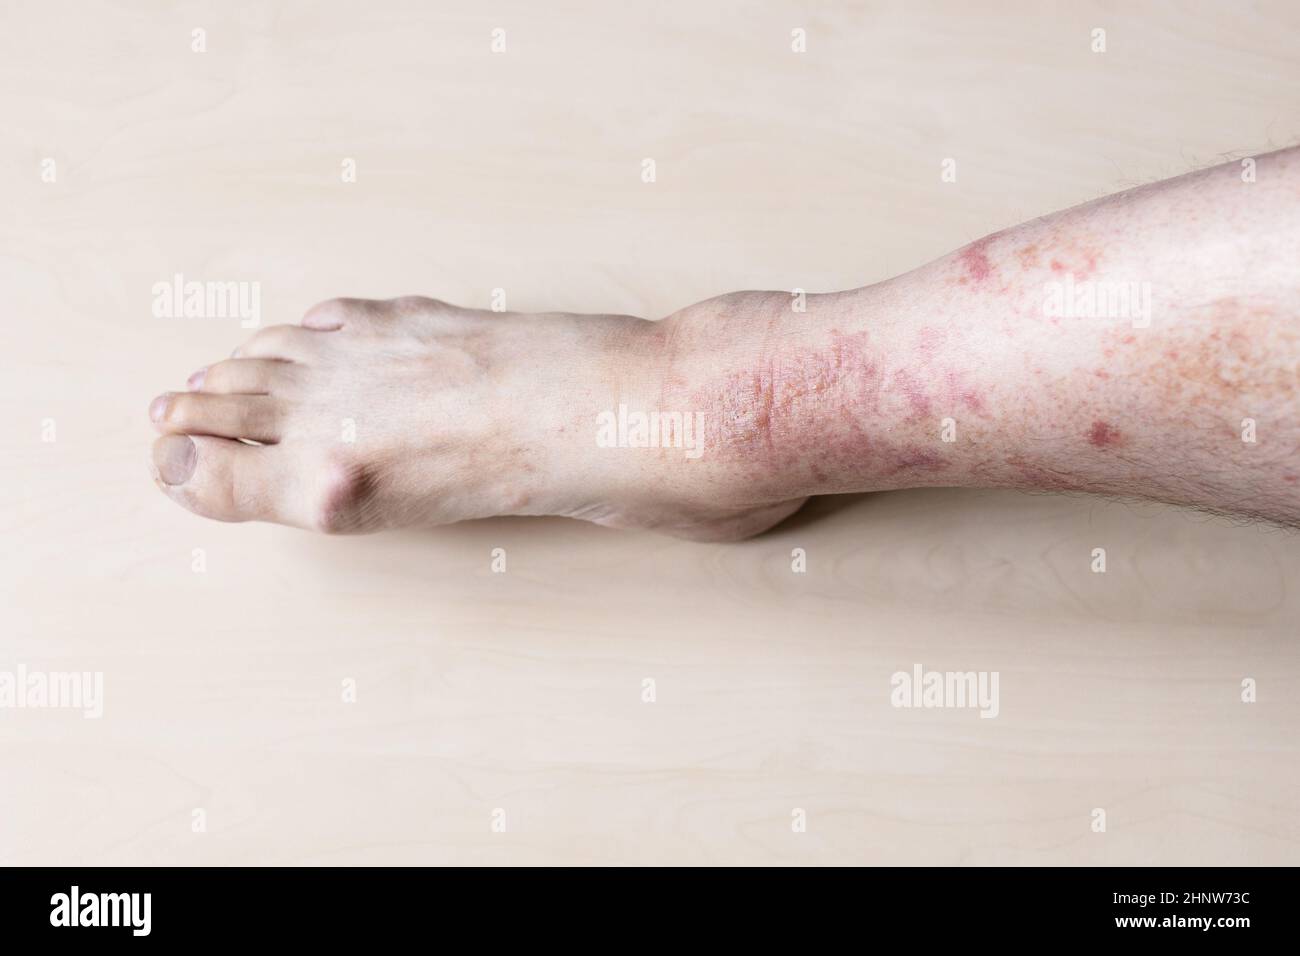 Sample Of Allergic Contact Dermatitis Male Shin With Itchy Red Rash